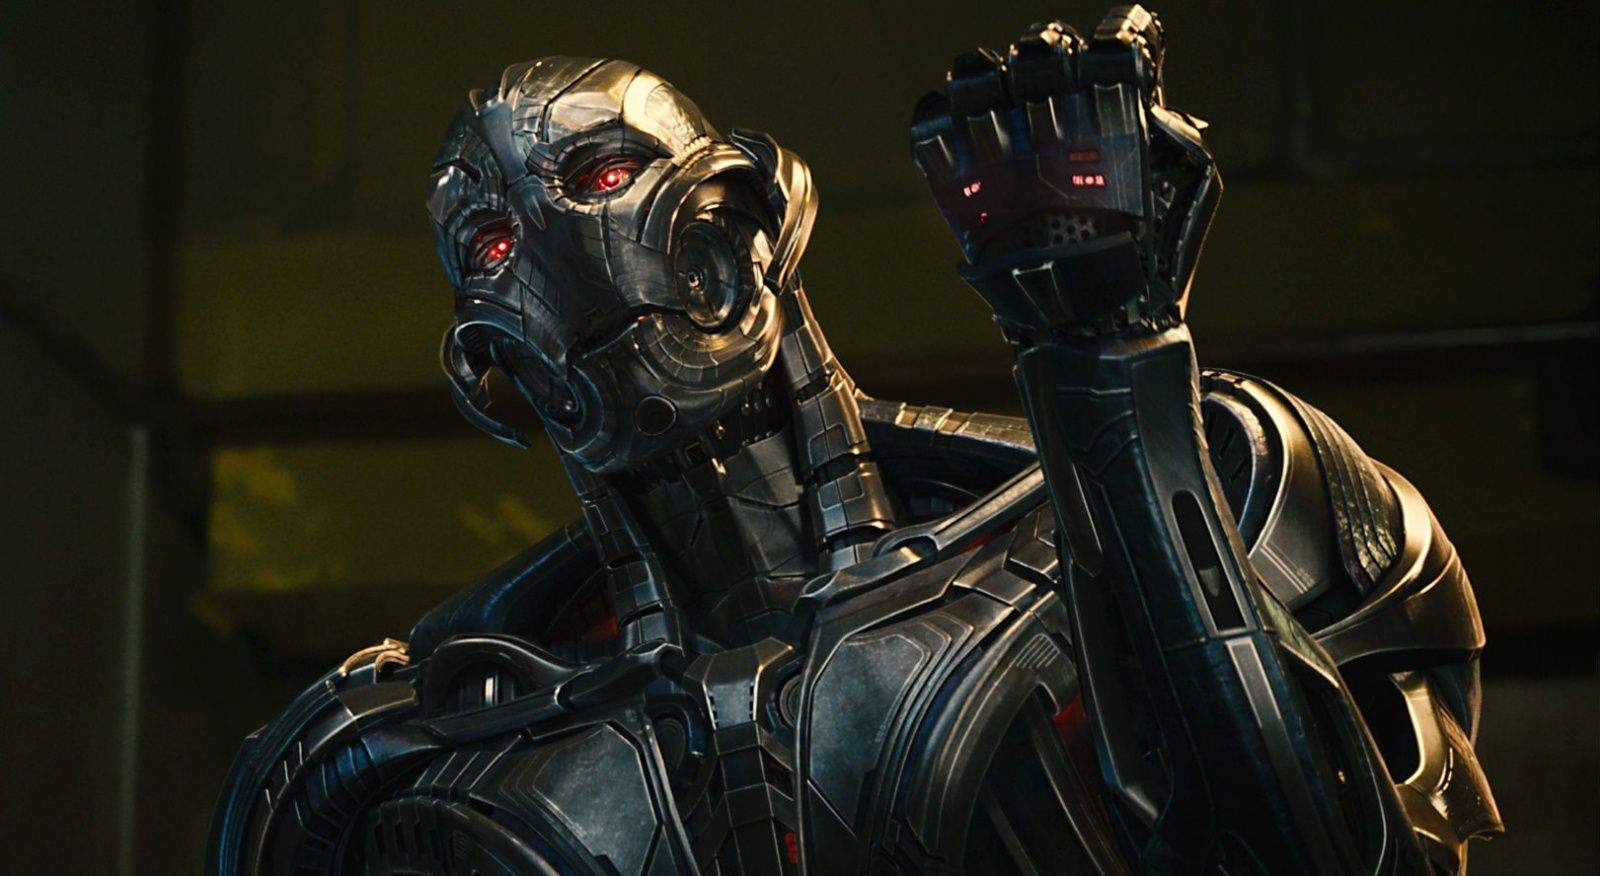 Ultron is up to no good in Avengers: Age of Ultron. Photo: Marvel Studios